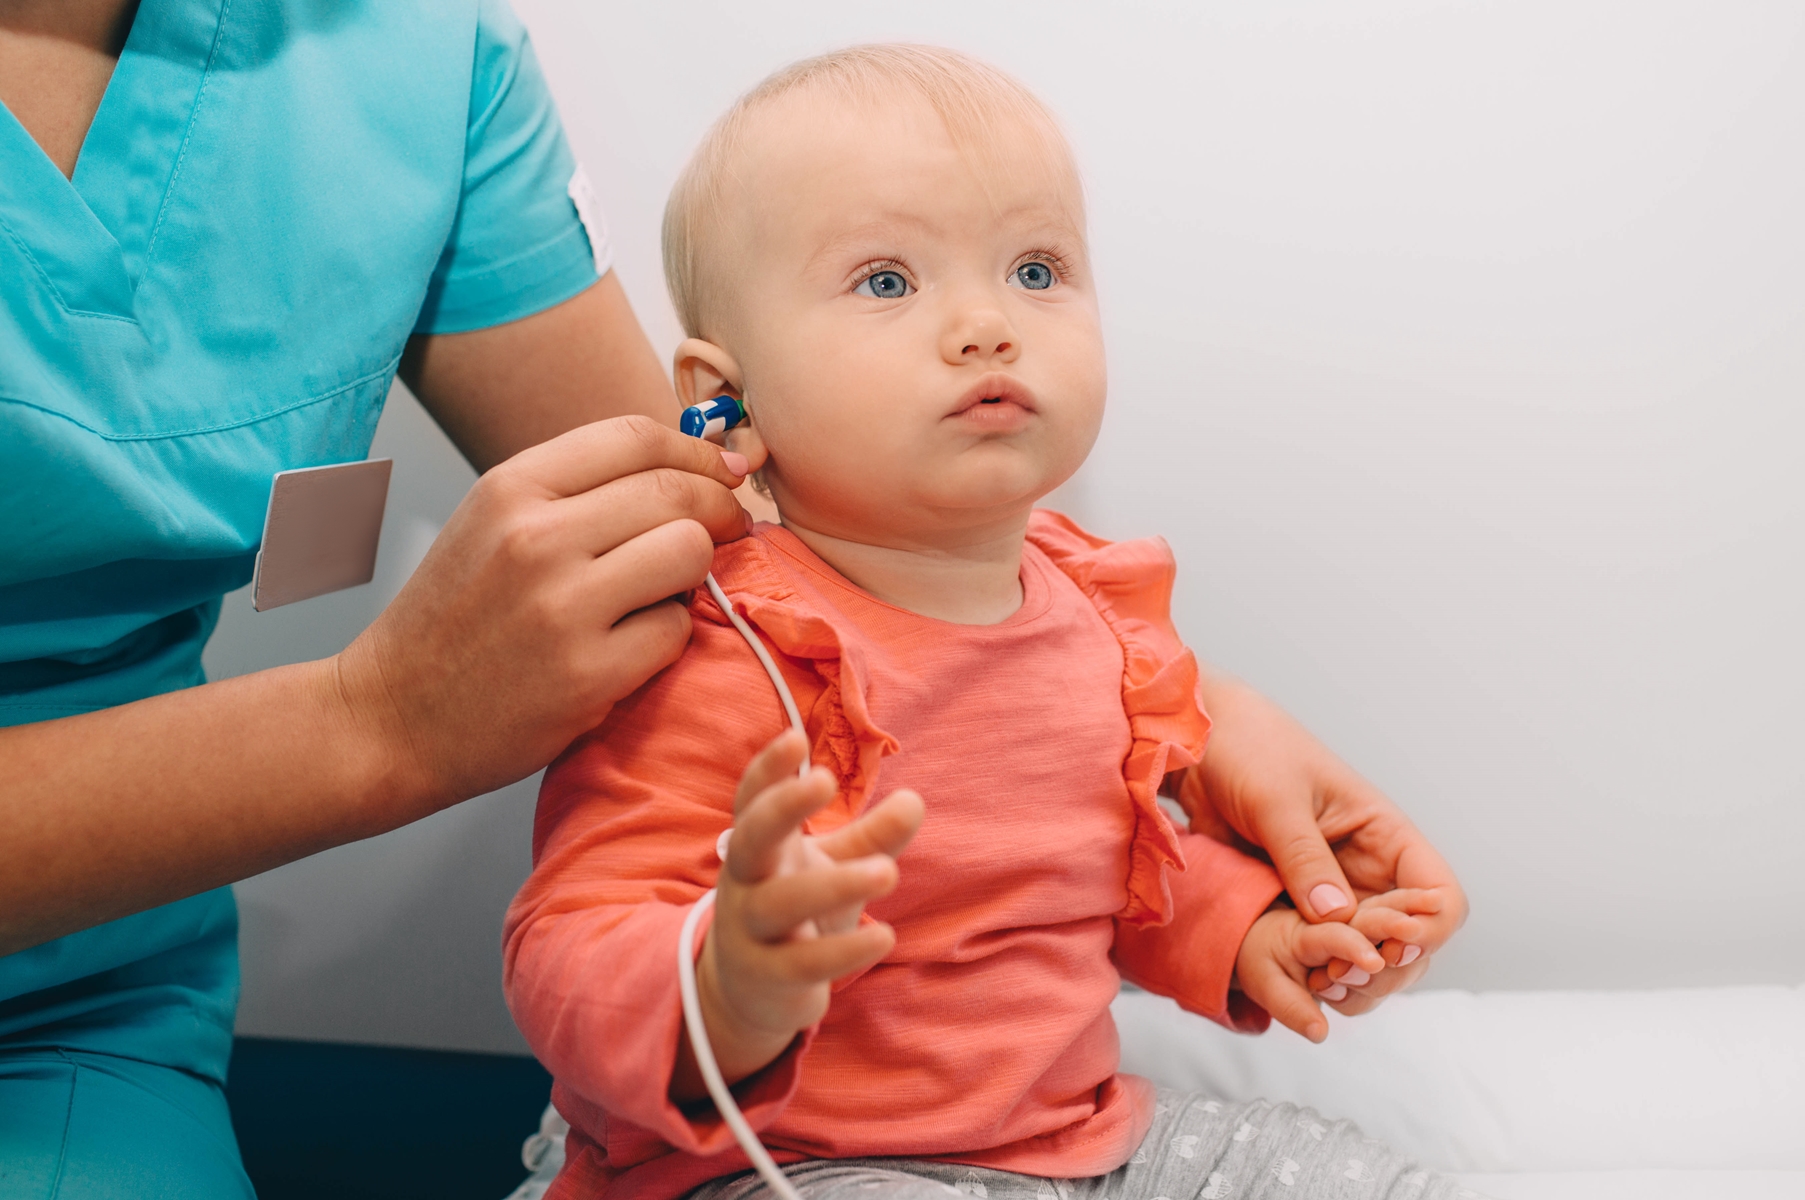 Healthcare professional puts soft probe in baby's ear